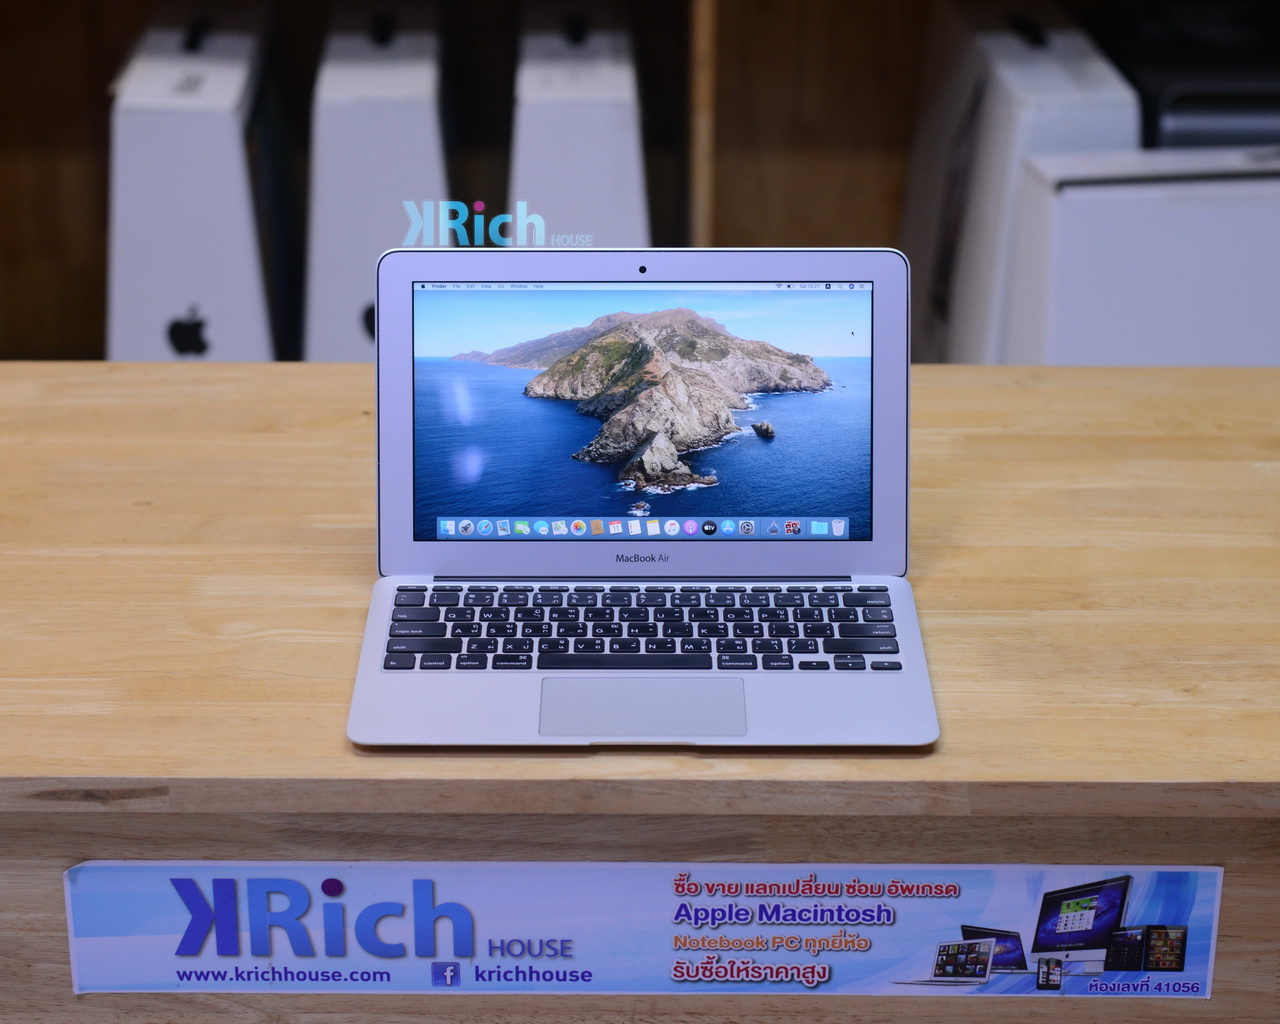 New Battery* MacBook Air 11-inch Mid 2013 Intel Core i5 1.3GHz ...